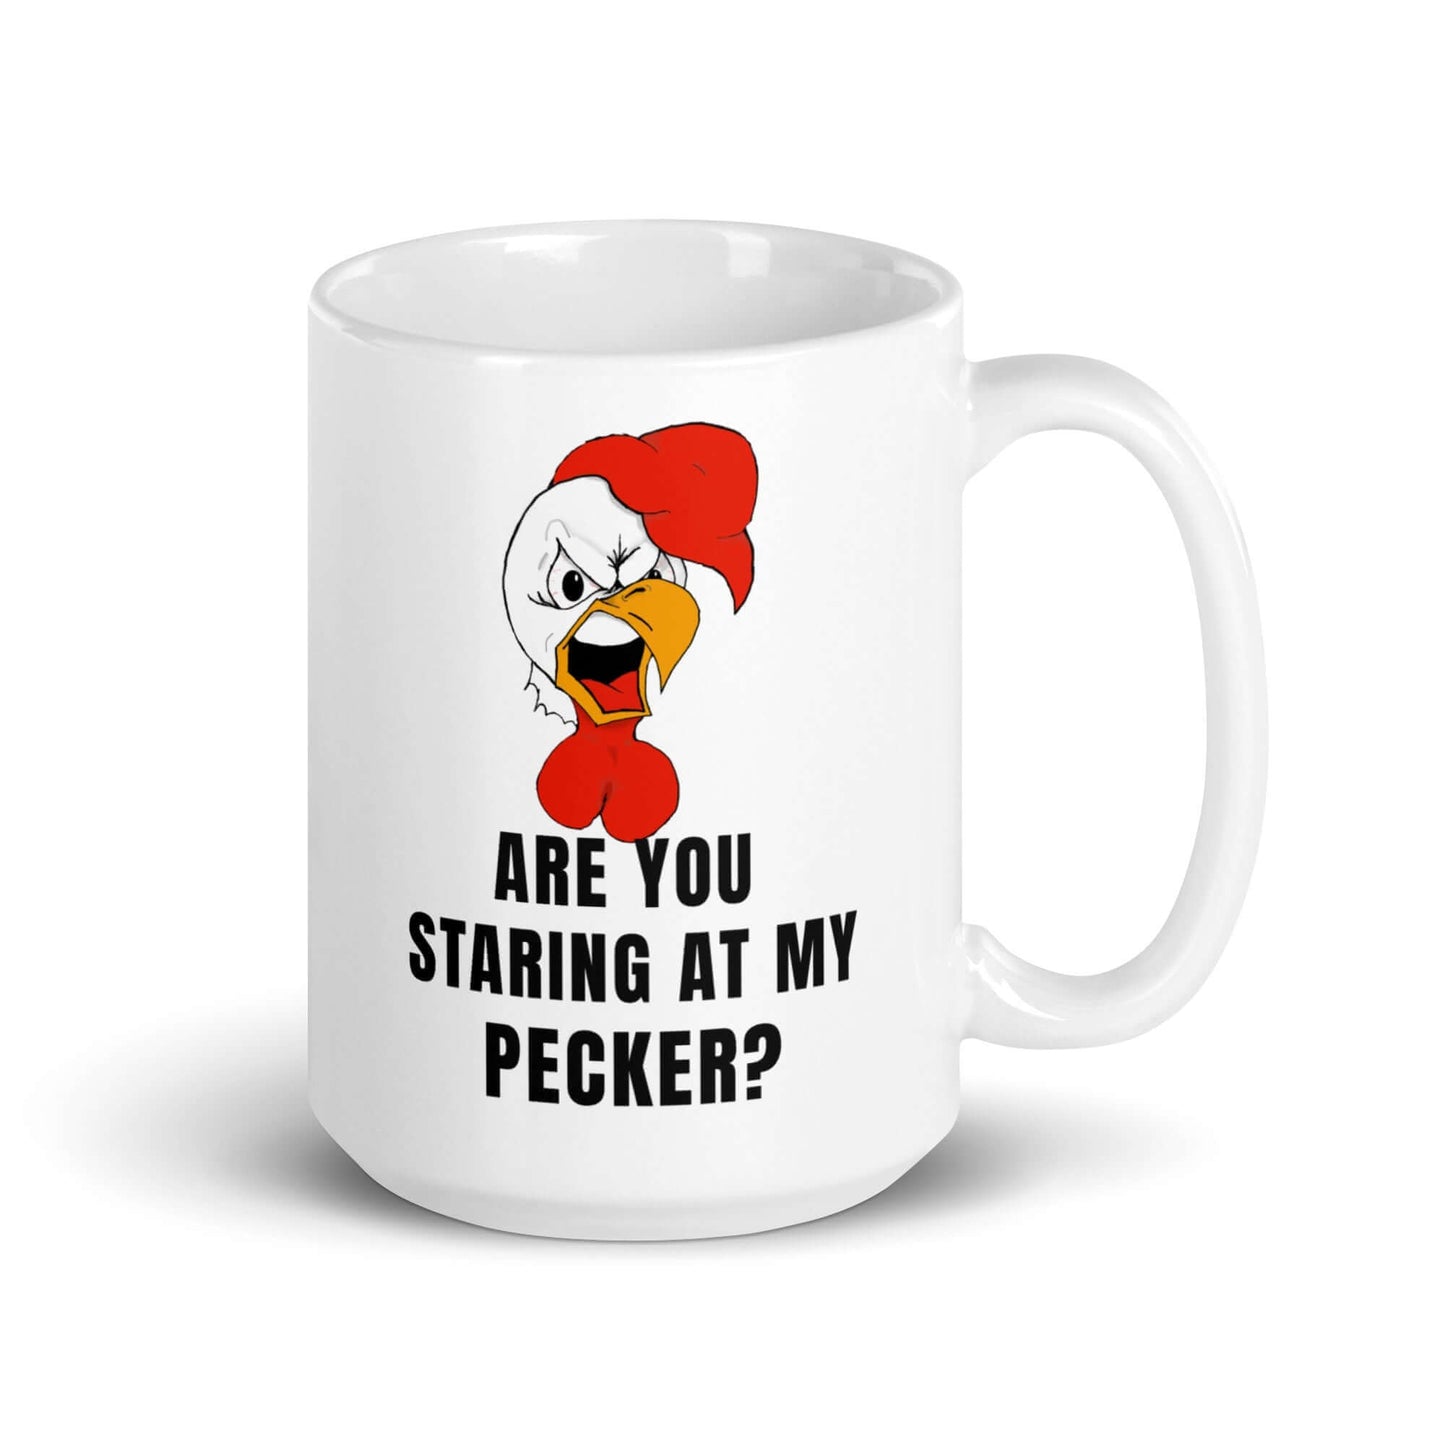 Are you staring at my pecker - White glossy mug - Horrible Designs